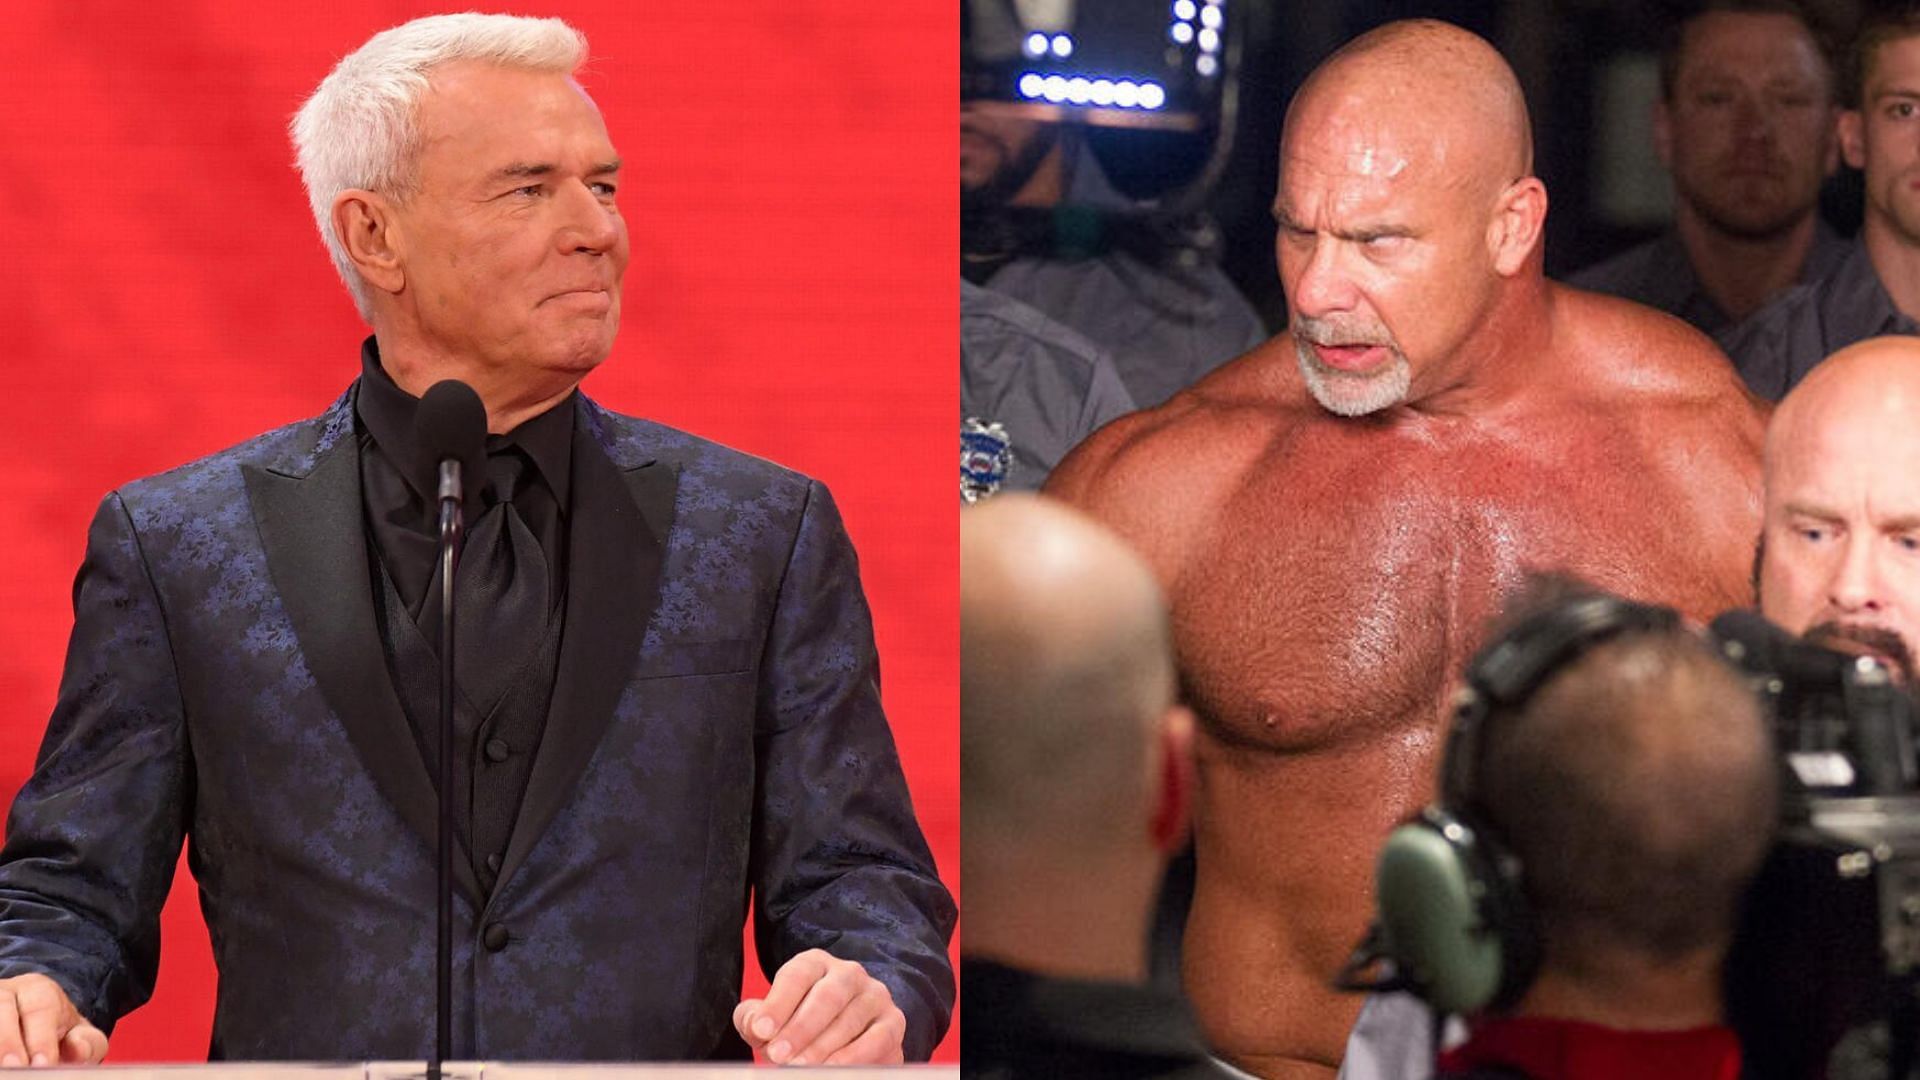 WWE Hall of Famers Eric Bischoff and Goldberg.